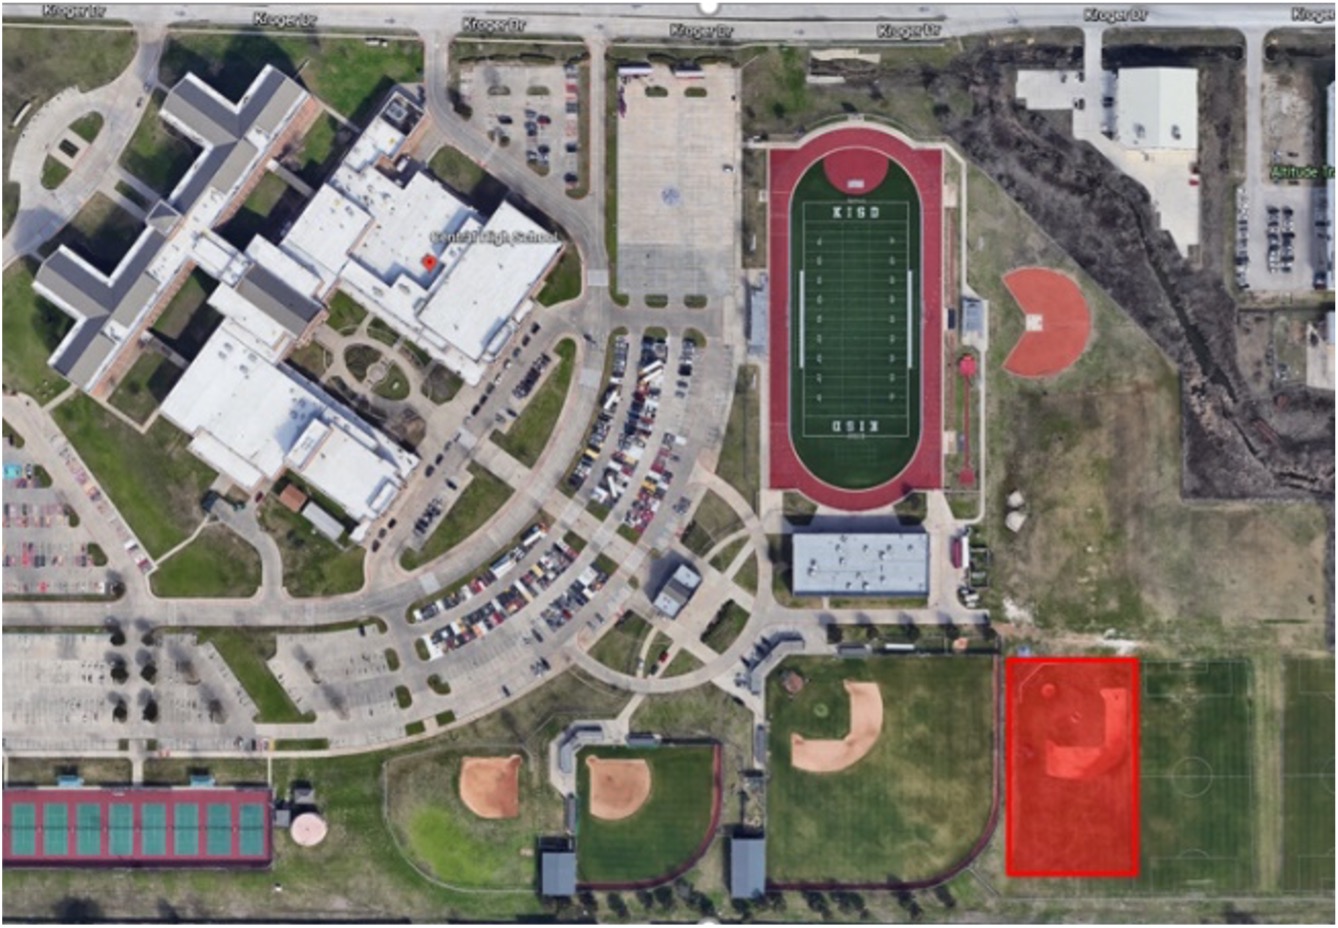 Site plan for CHS indoor extracurricular facility